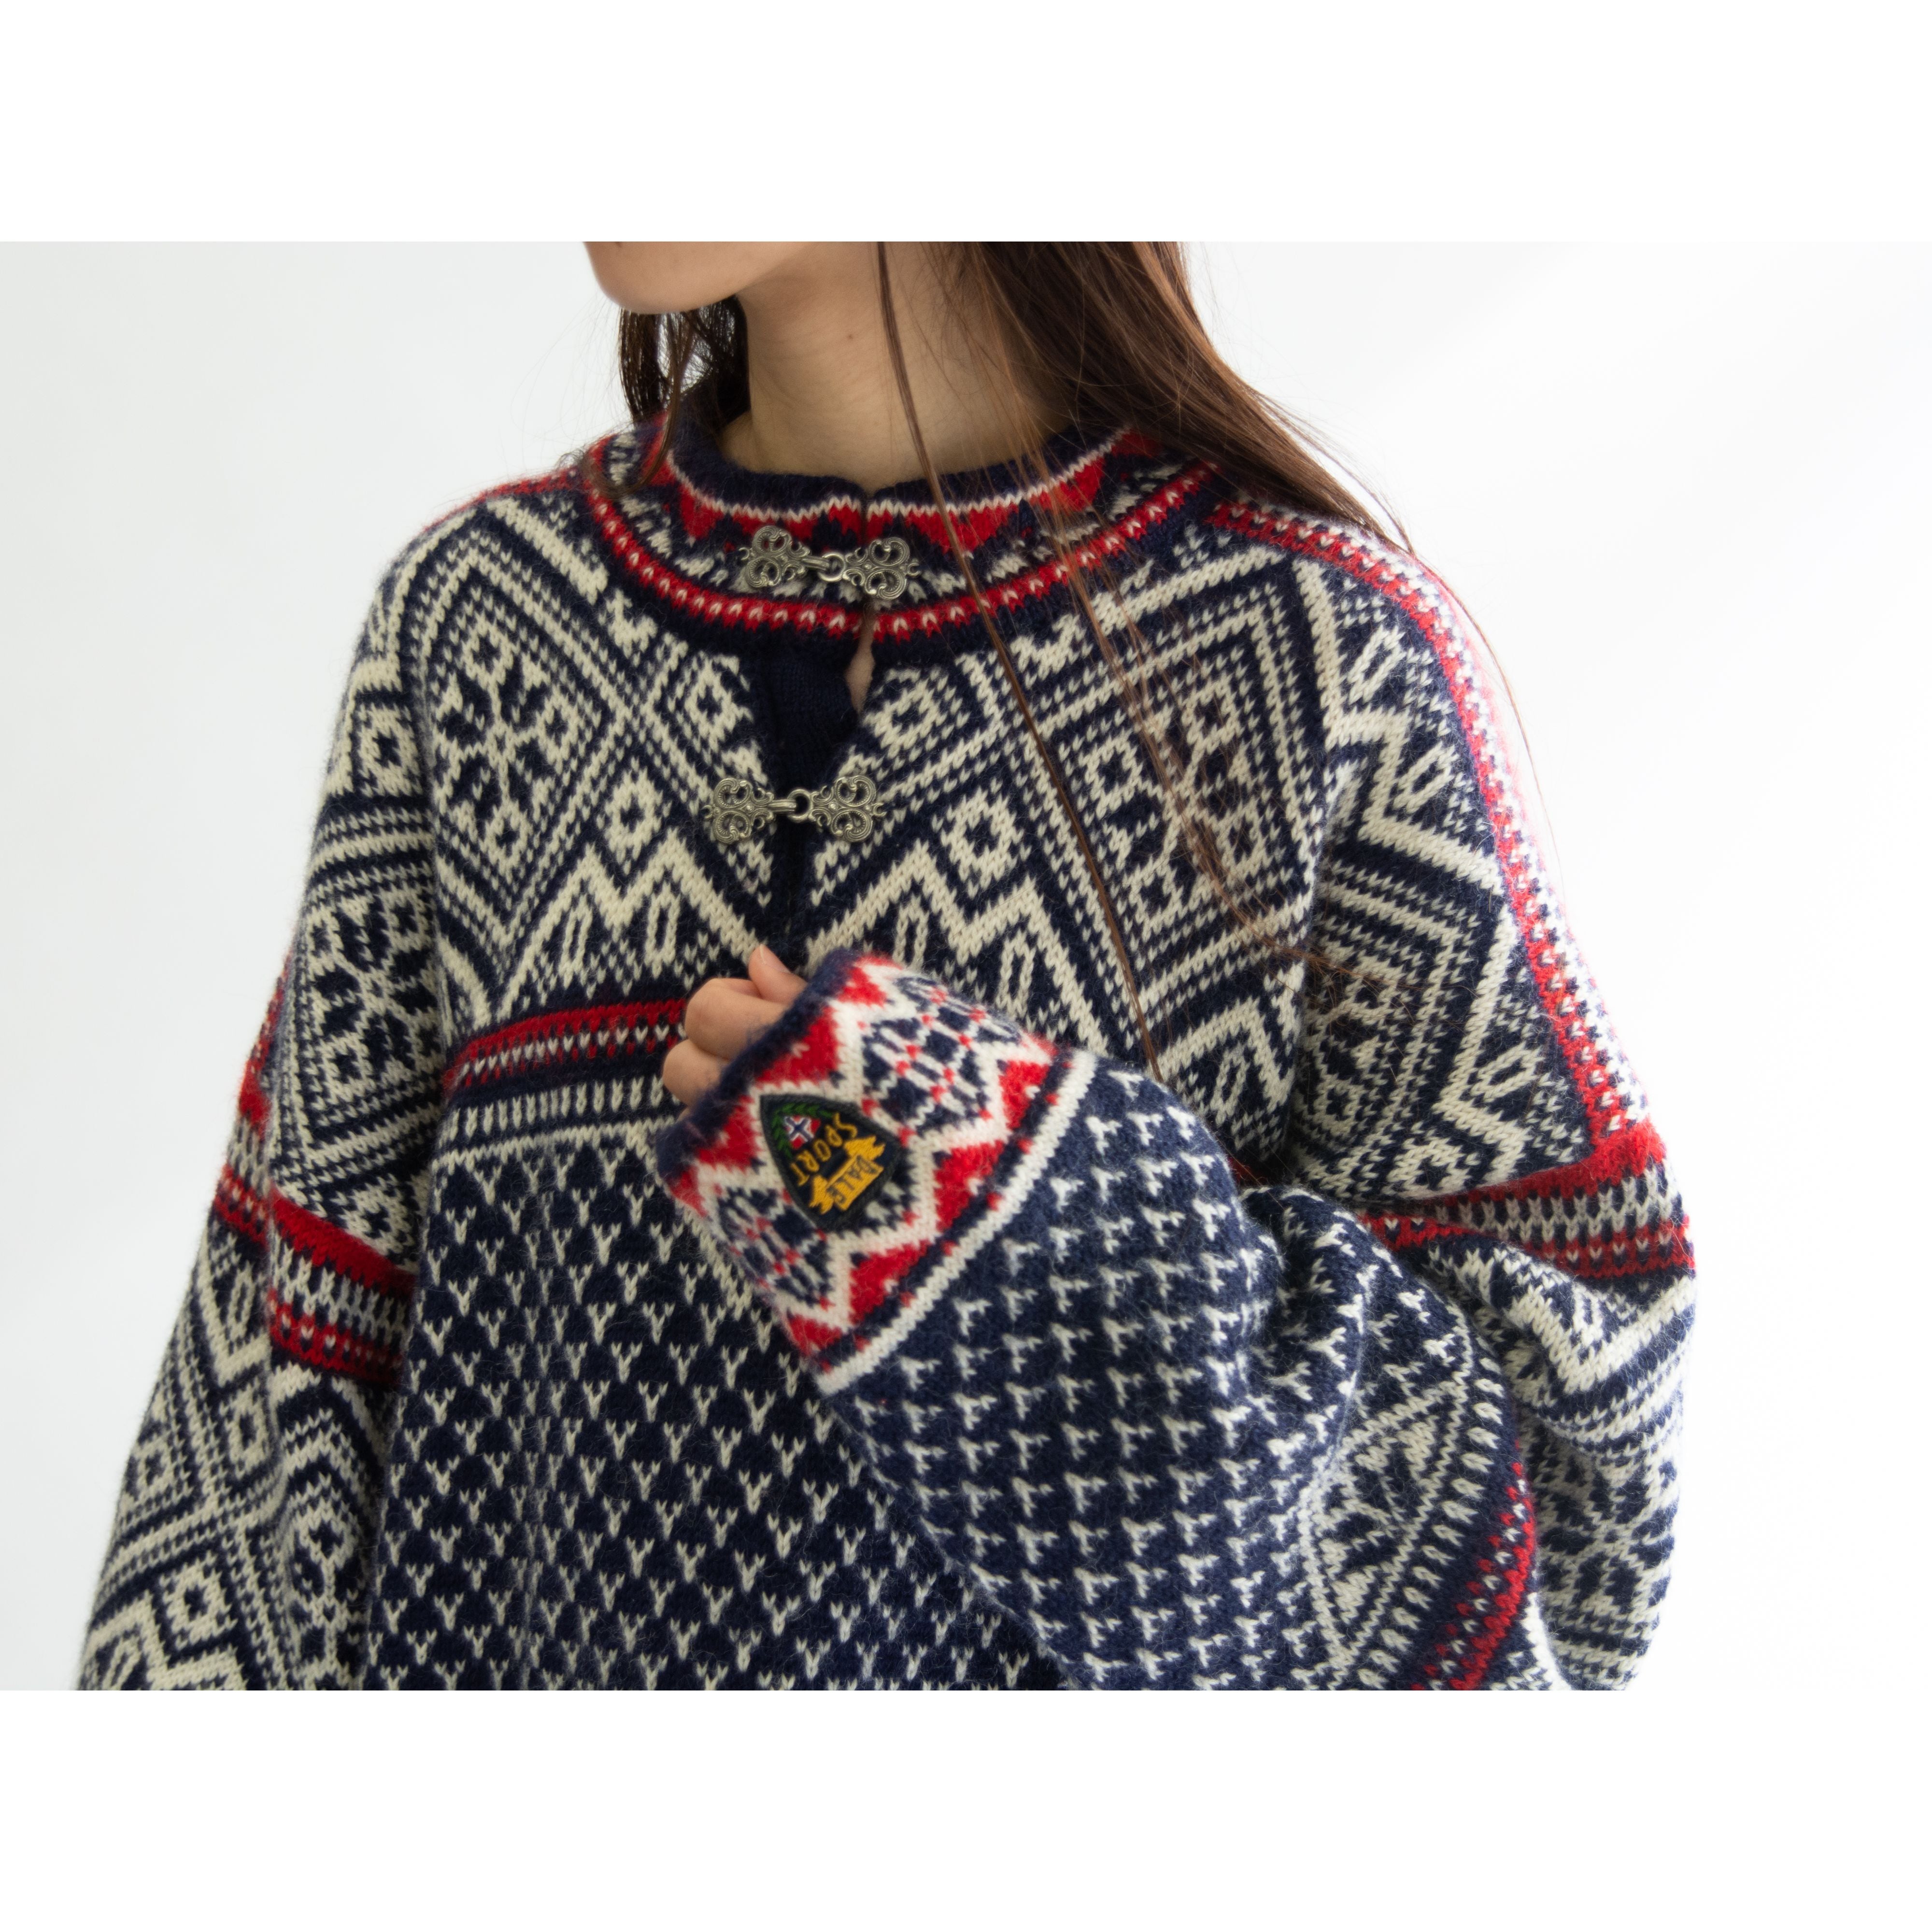 【DALE OF NORWAY】Made in Norway 100% wool Nordic sweater 